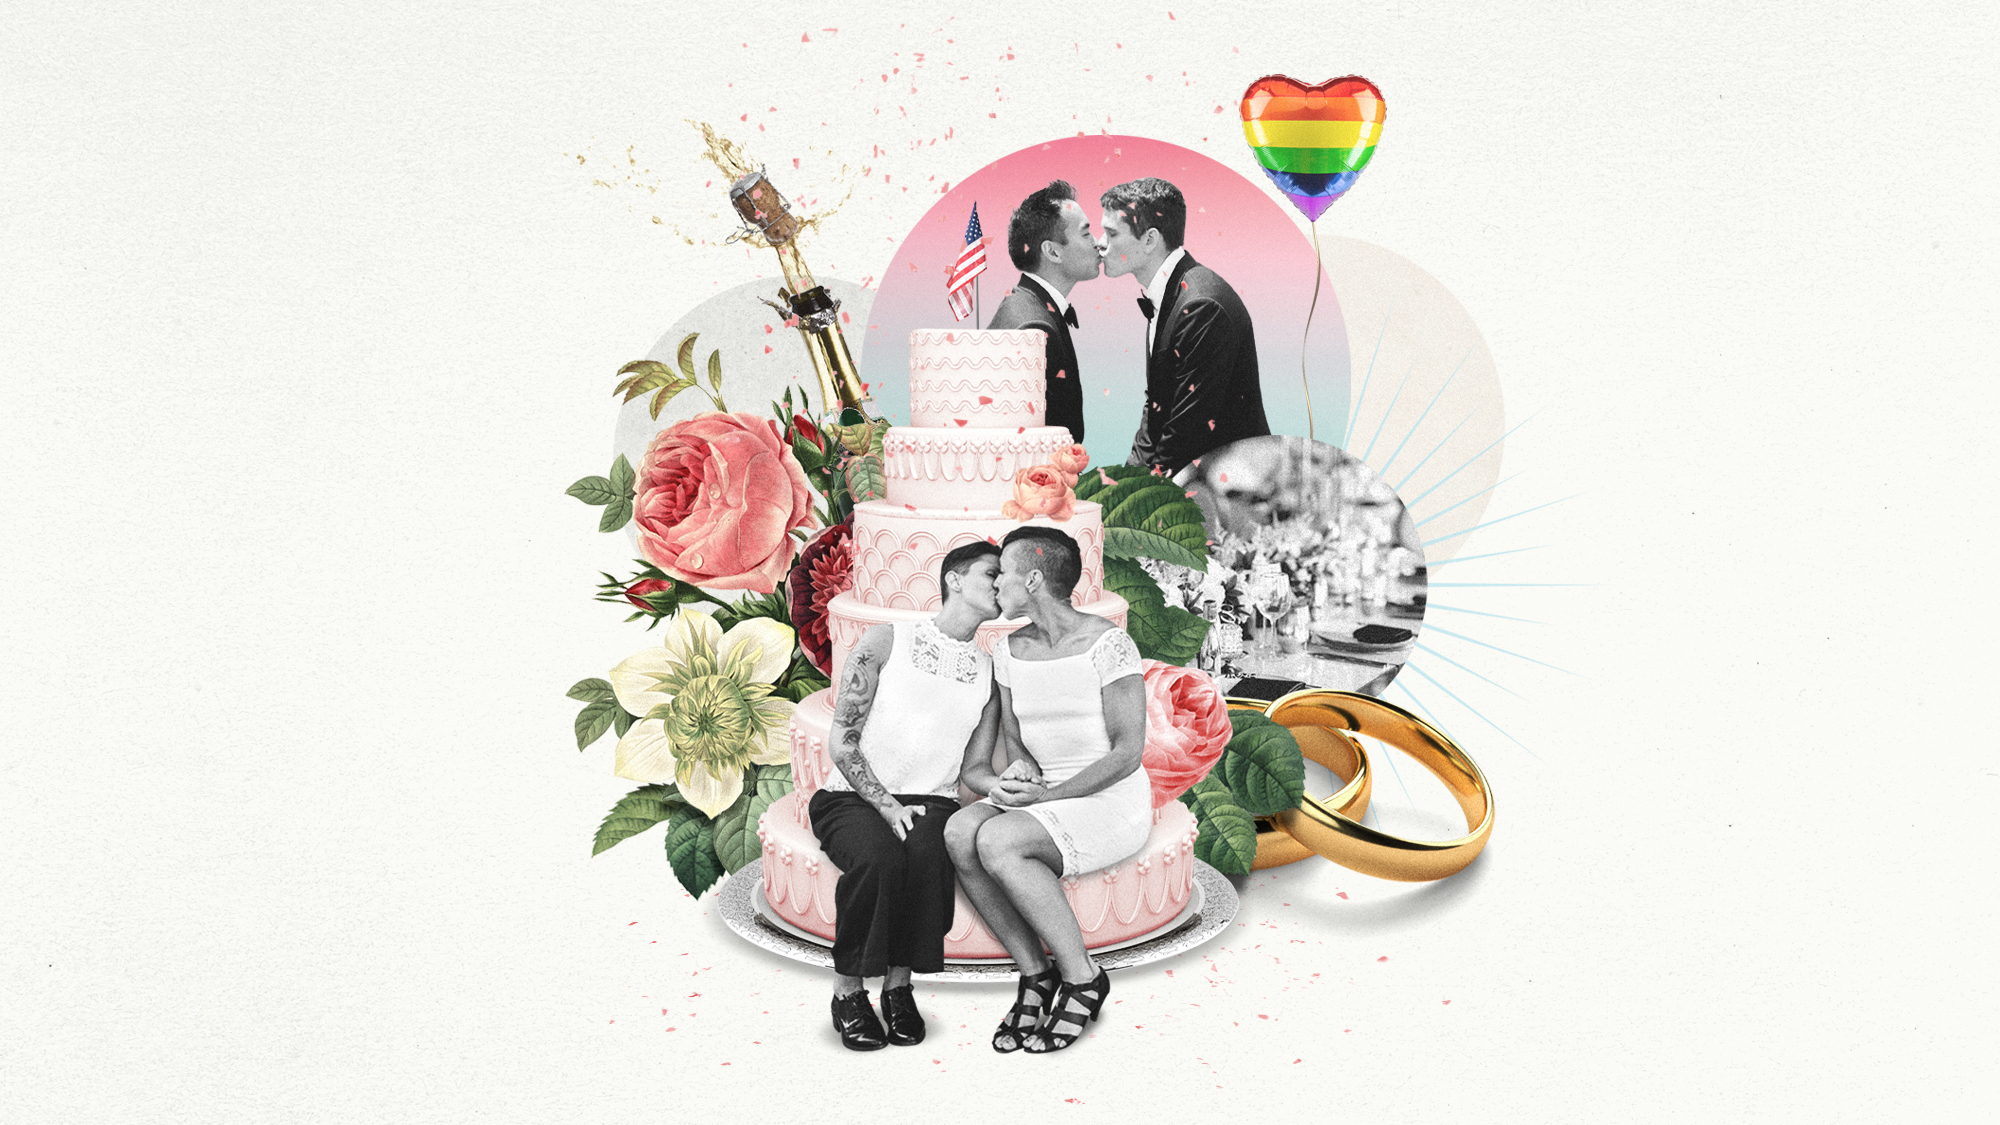  How has same-sex marriage changed America? 